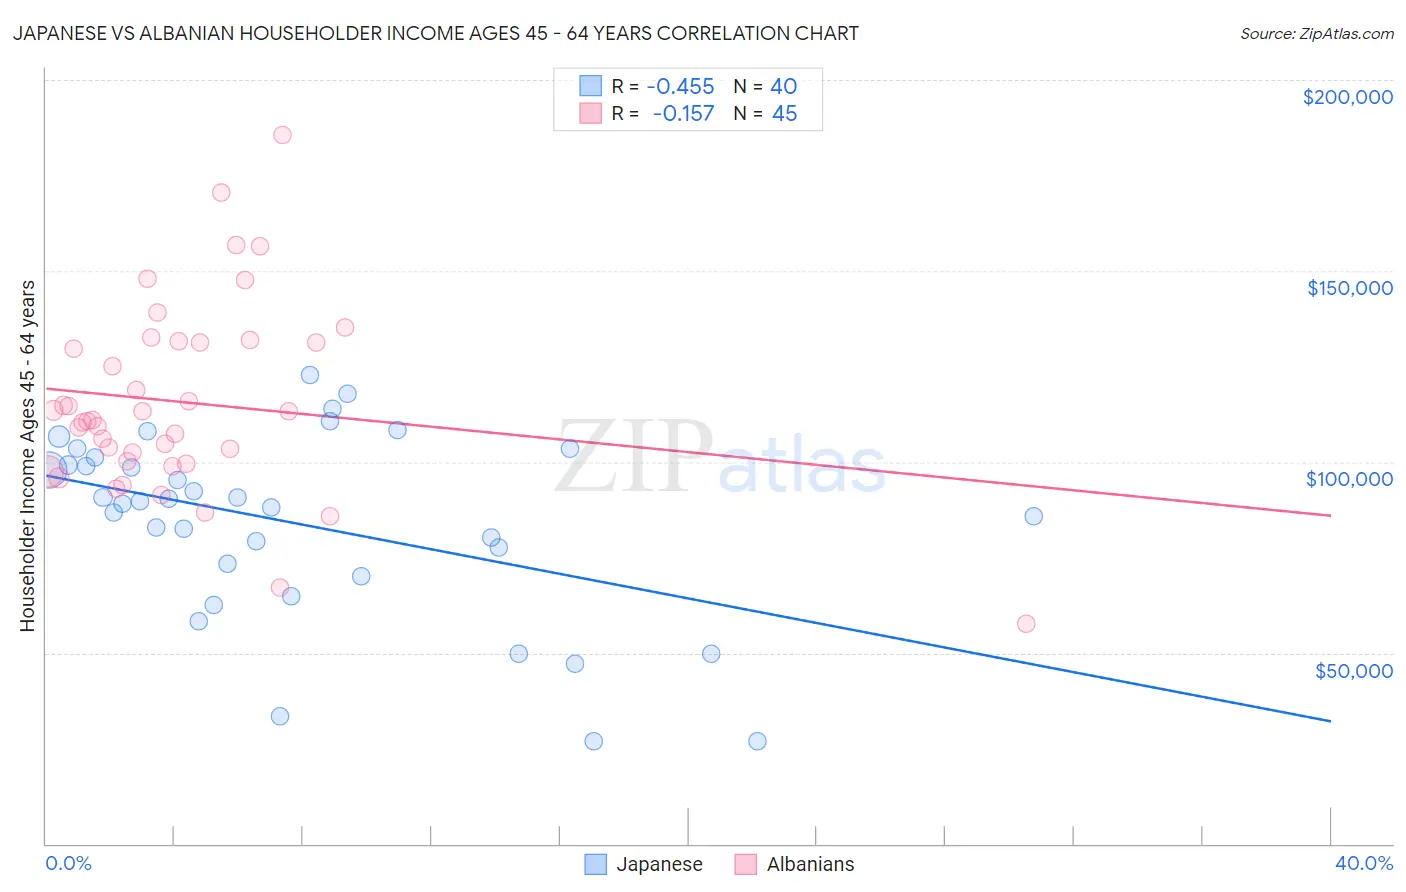 Japanese vs Albanian Householder Income Ages 45 - 64 years